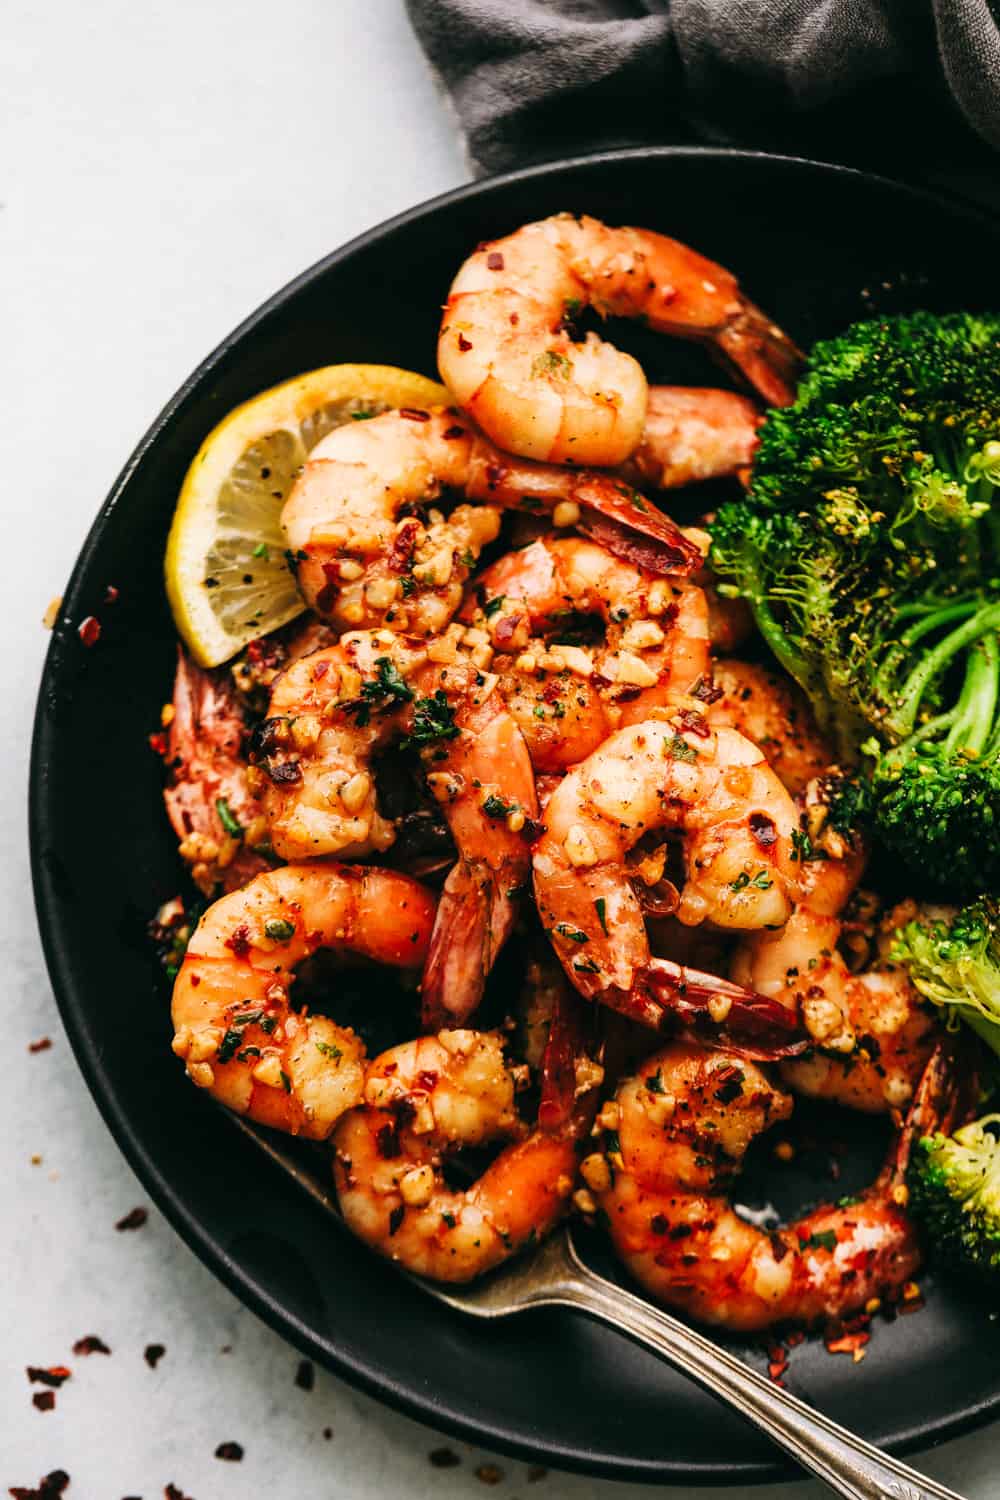 Brown Butter Spicy Garlic Shrimp on a black plate with broccoli.